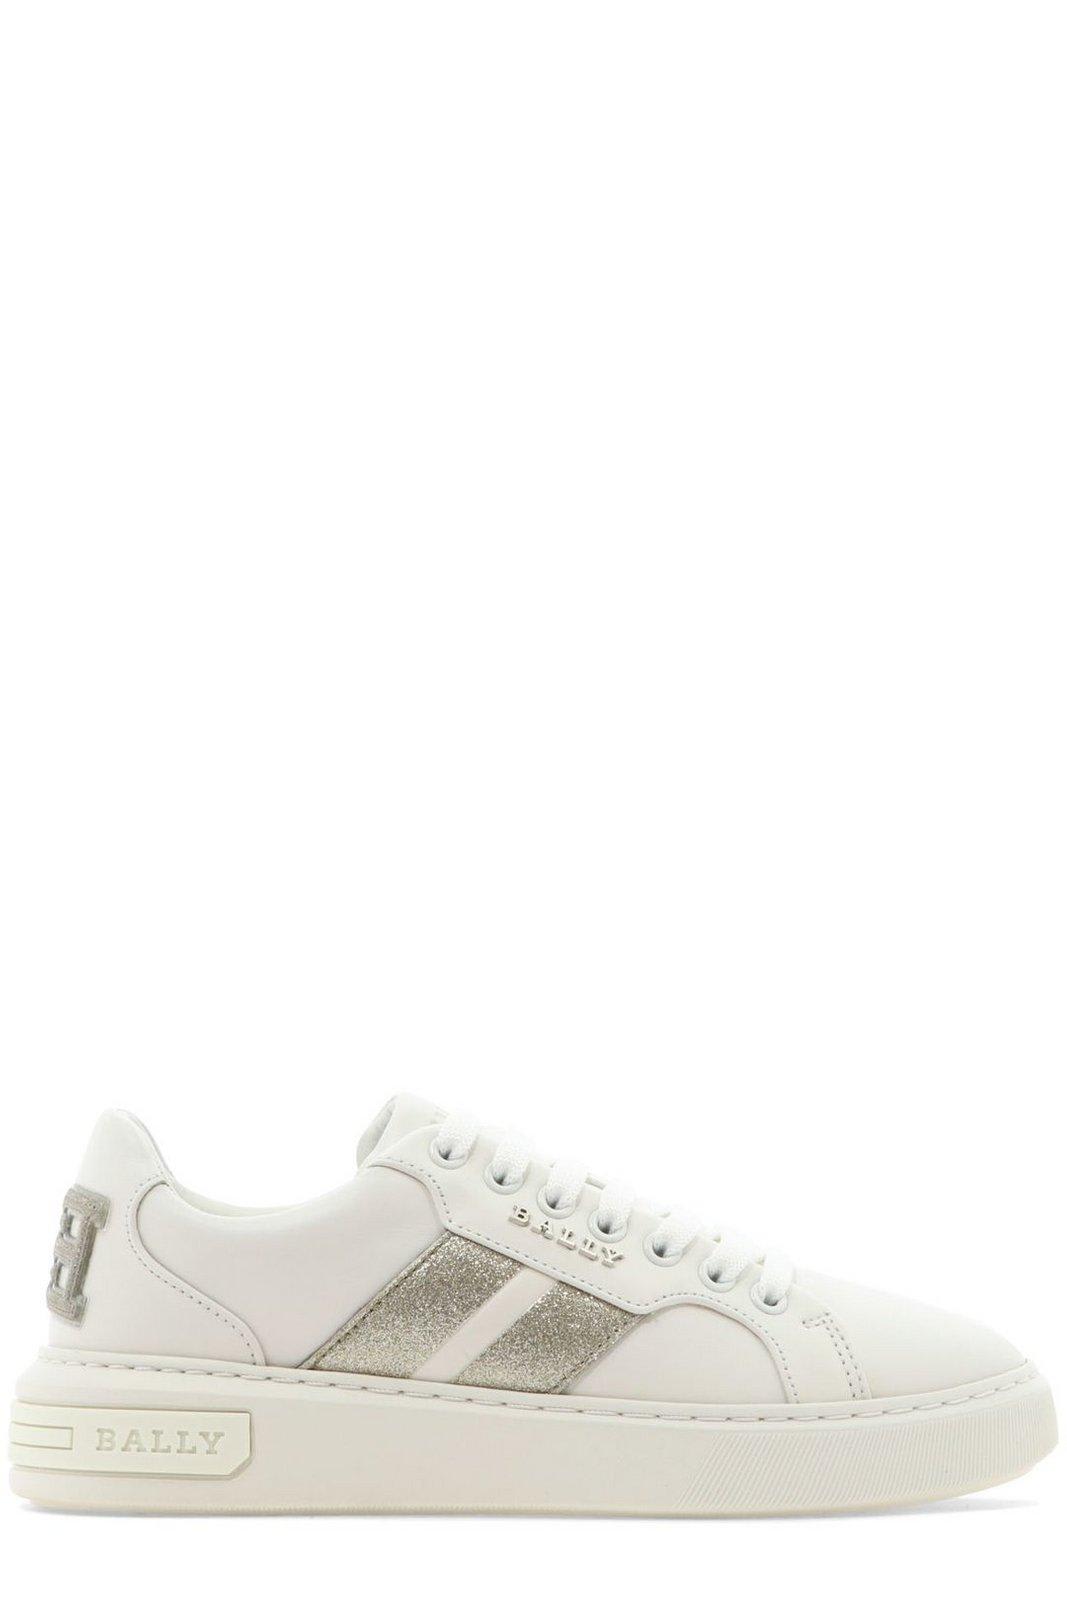 Bally Melany Low-top Sneakers